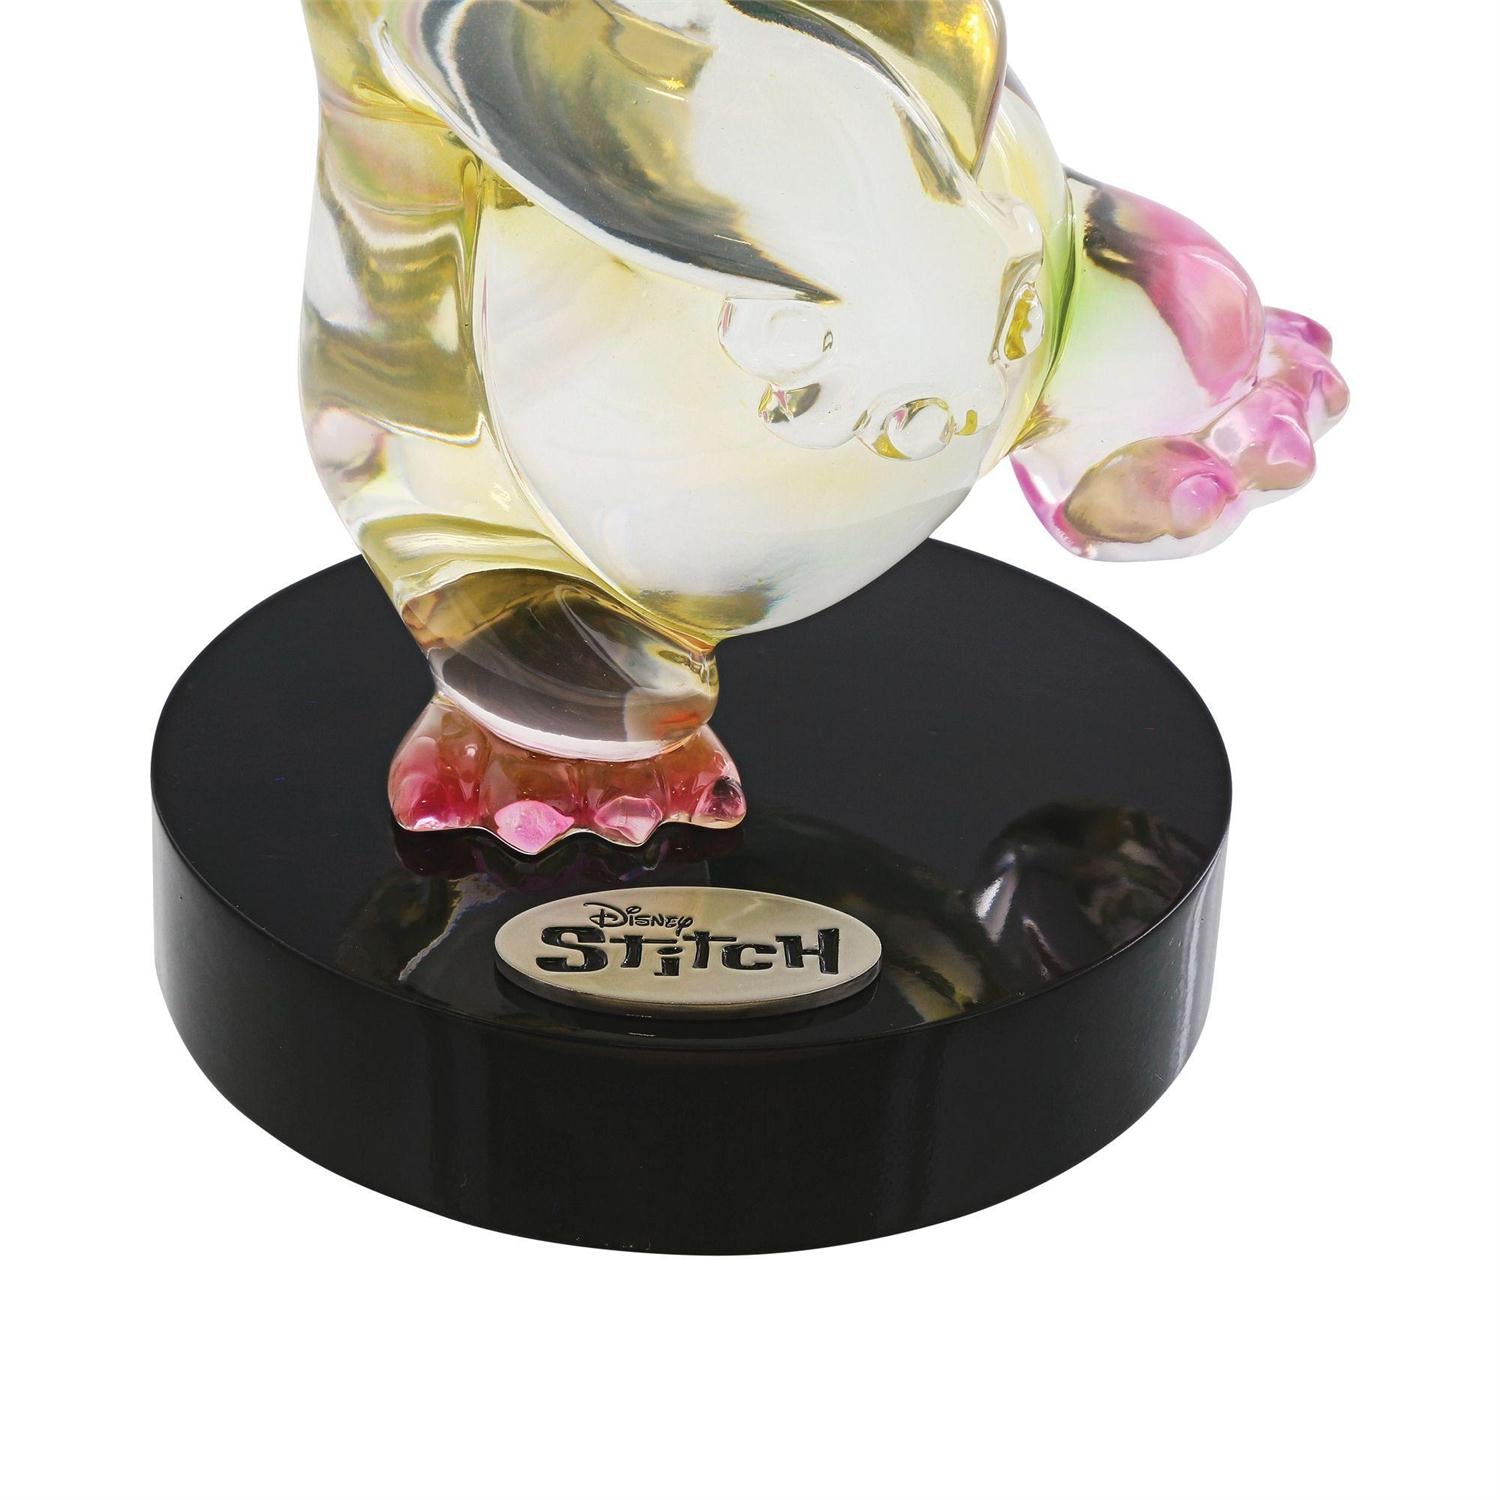 Stitch- clear resin with a rainbow color tint - stand